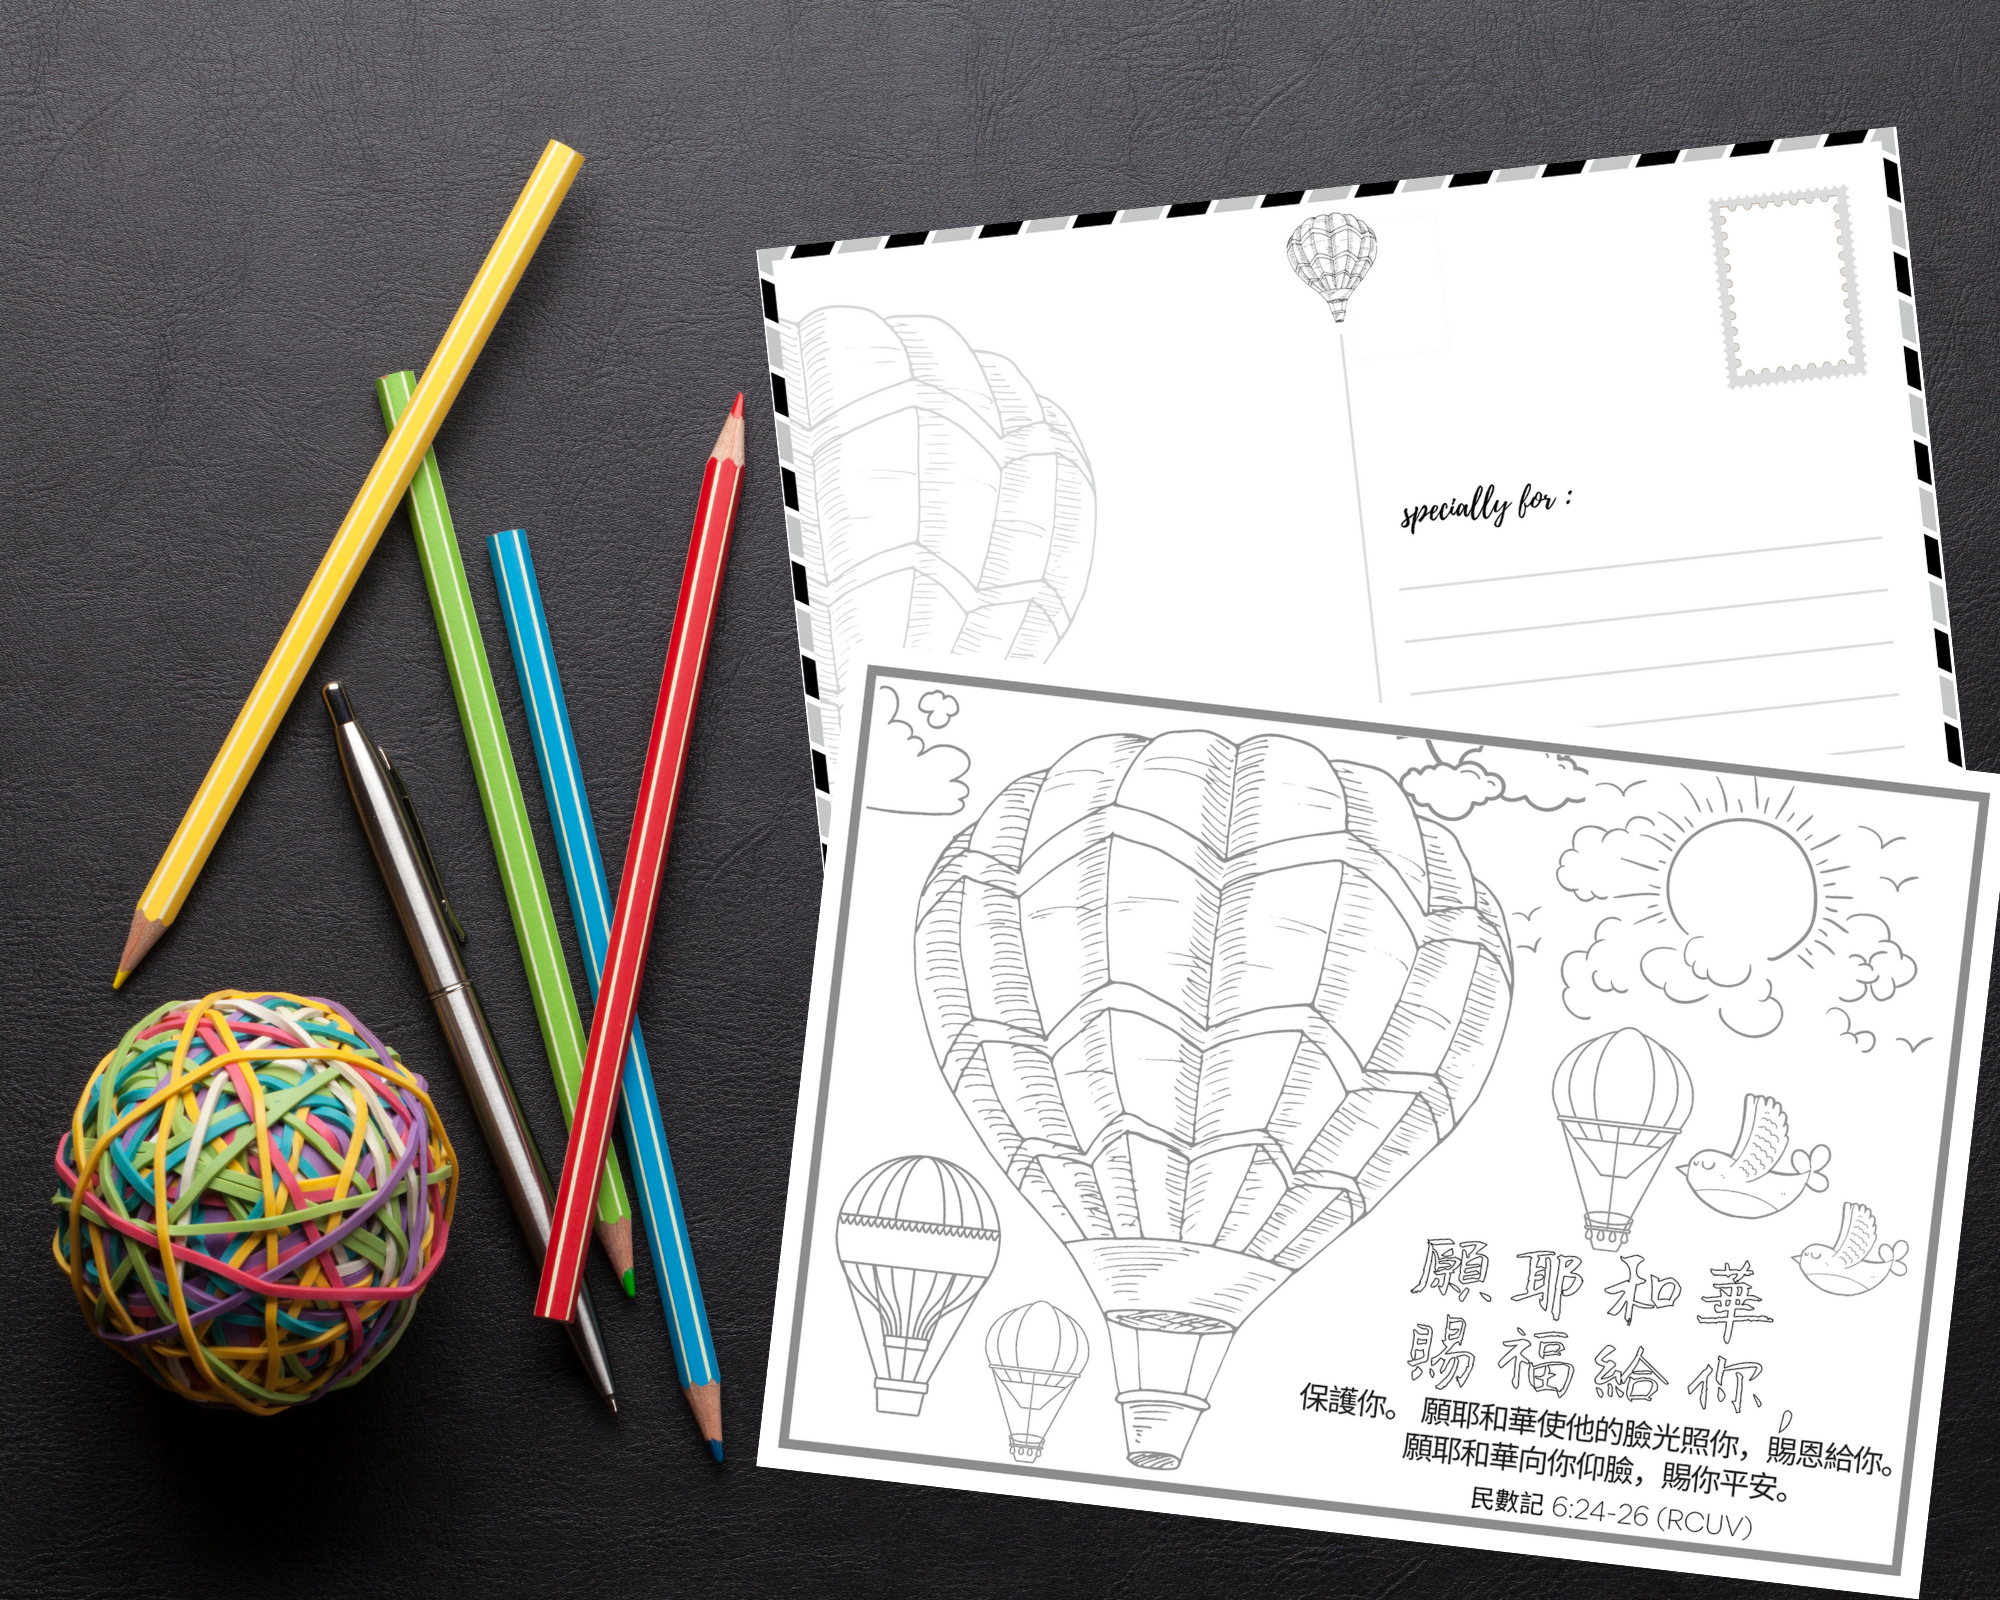 Love Joy Peace Hope Scripture Coloring Cards with Simplified Pouch (English or Chinese) by BBB